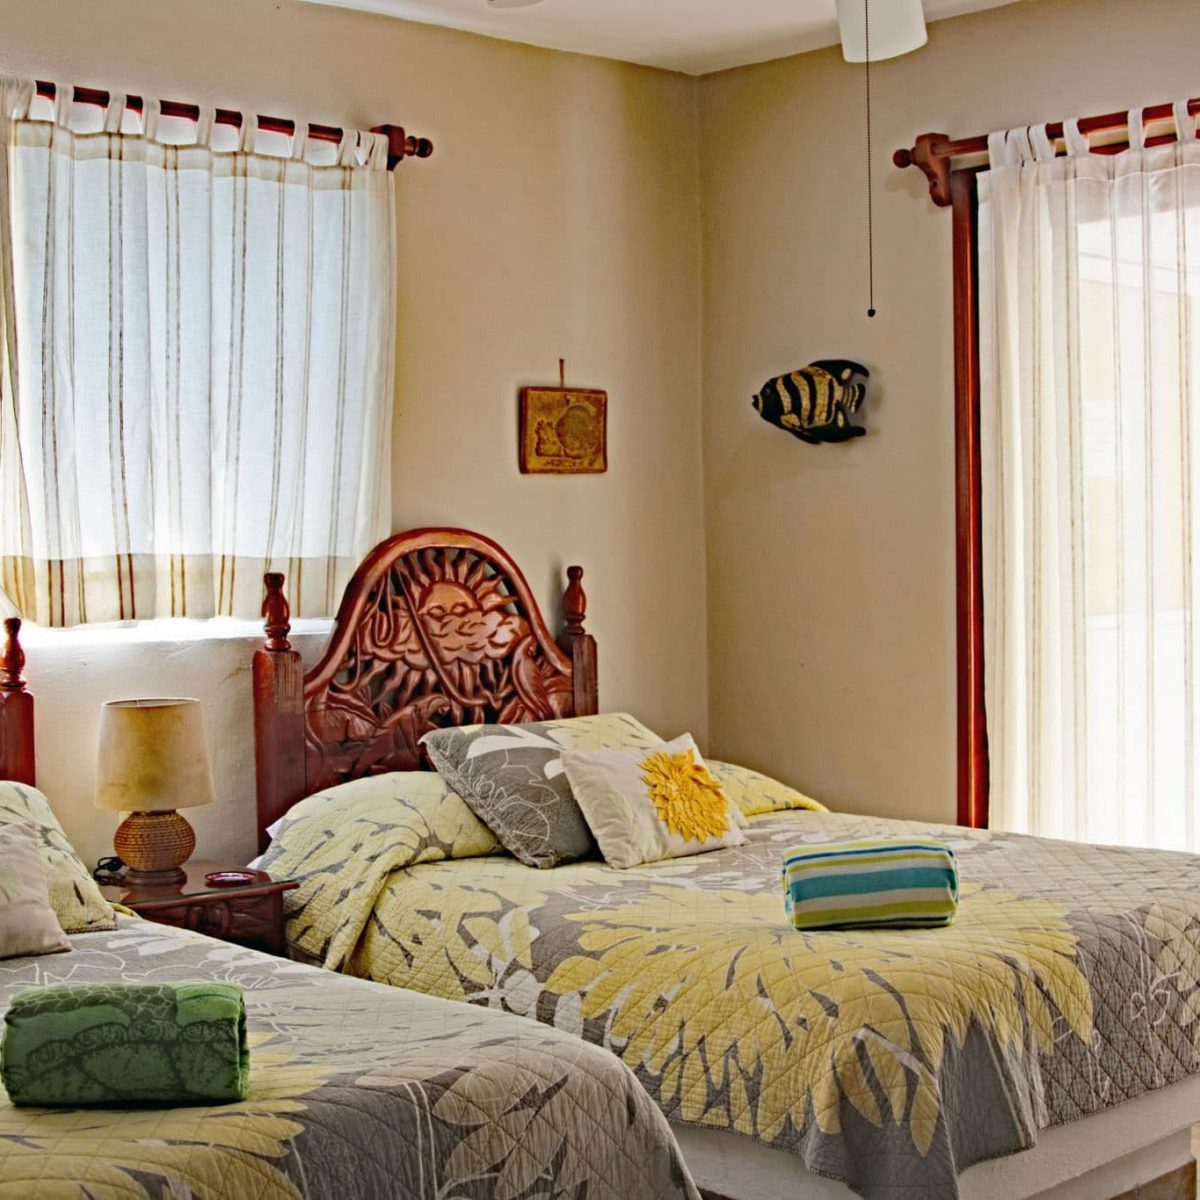 Villa Jardin, La Sirena #16, The downstairs Double Room has both a Twin and a Double Bed